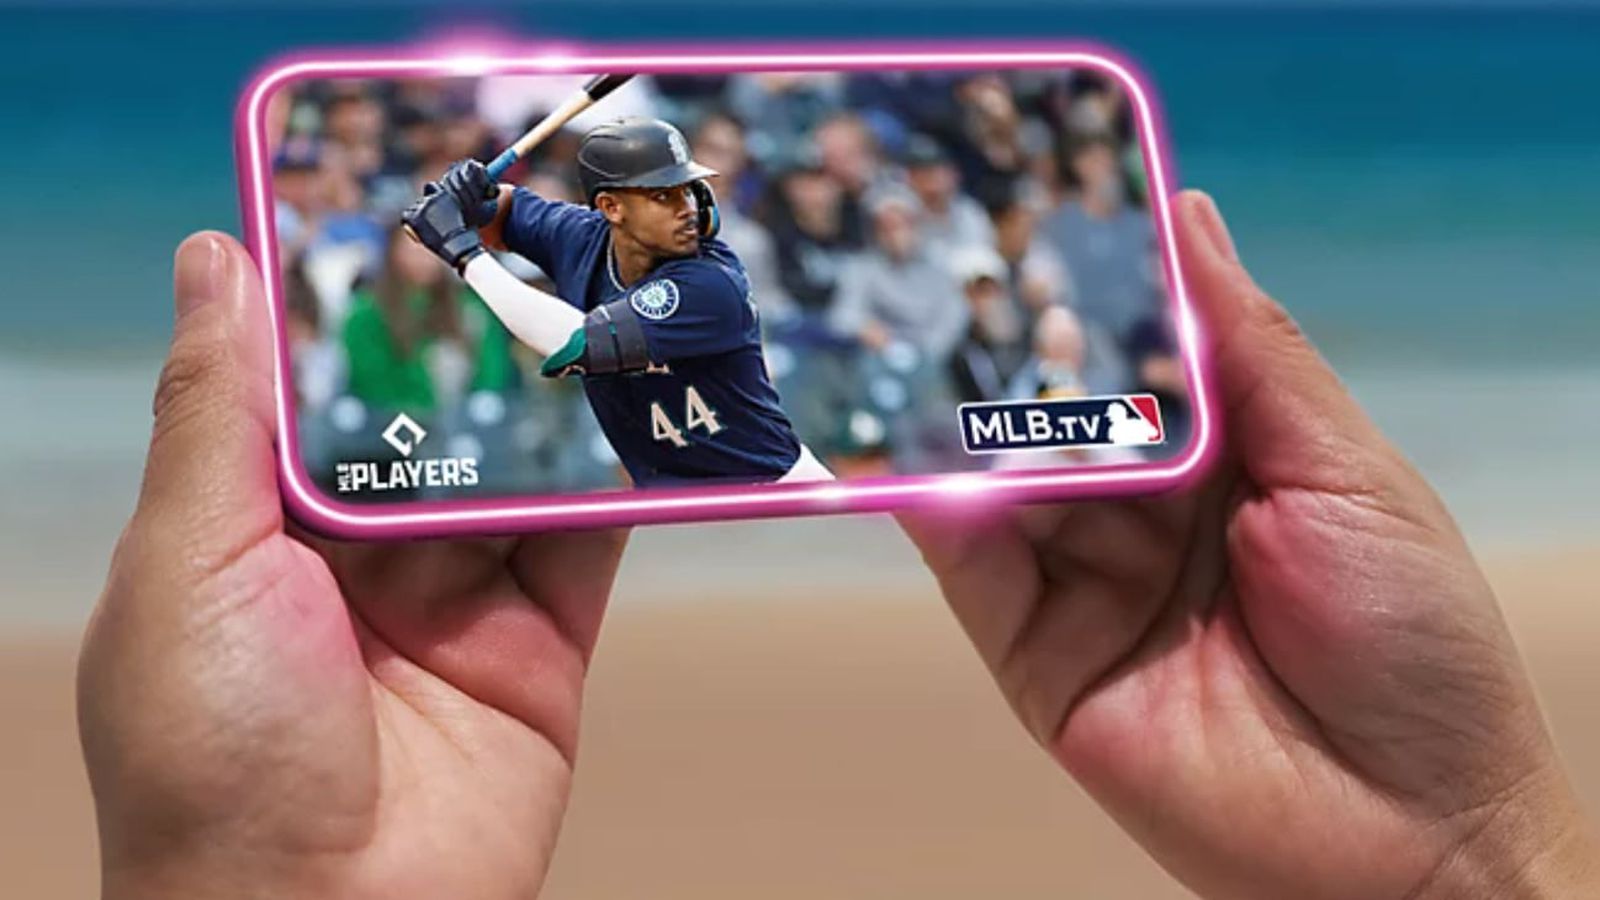 T-Mobile Renews MLB Partnership to Offer Subscribers Free MLB.TV Access for Next Six Years - macrumors.com